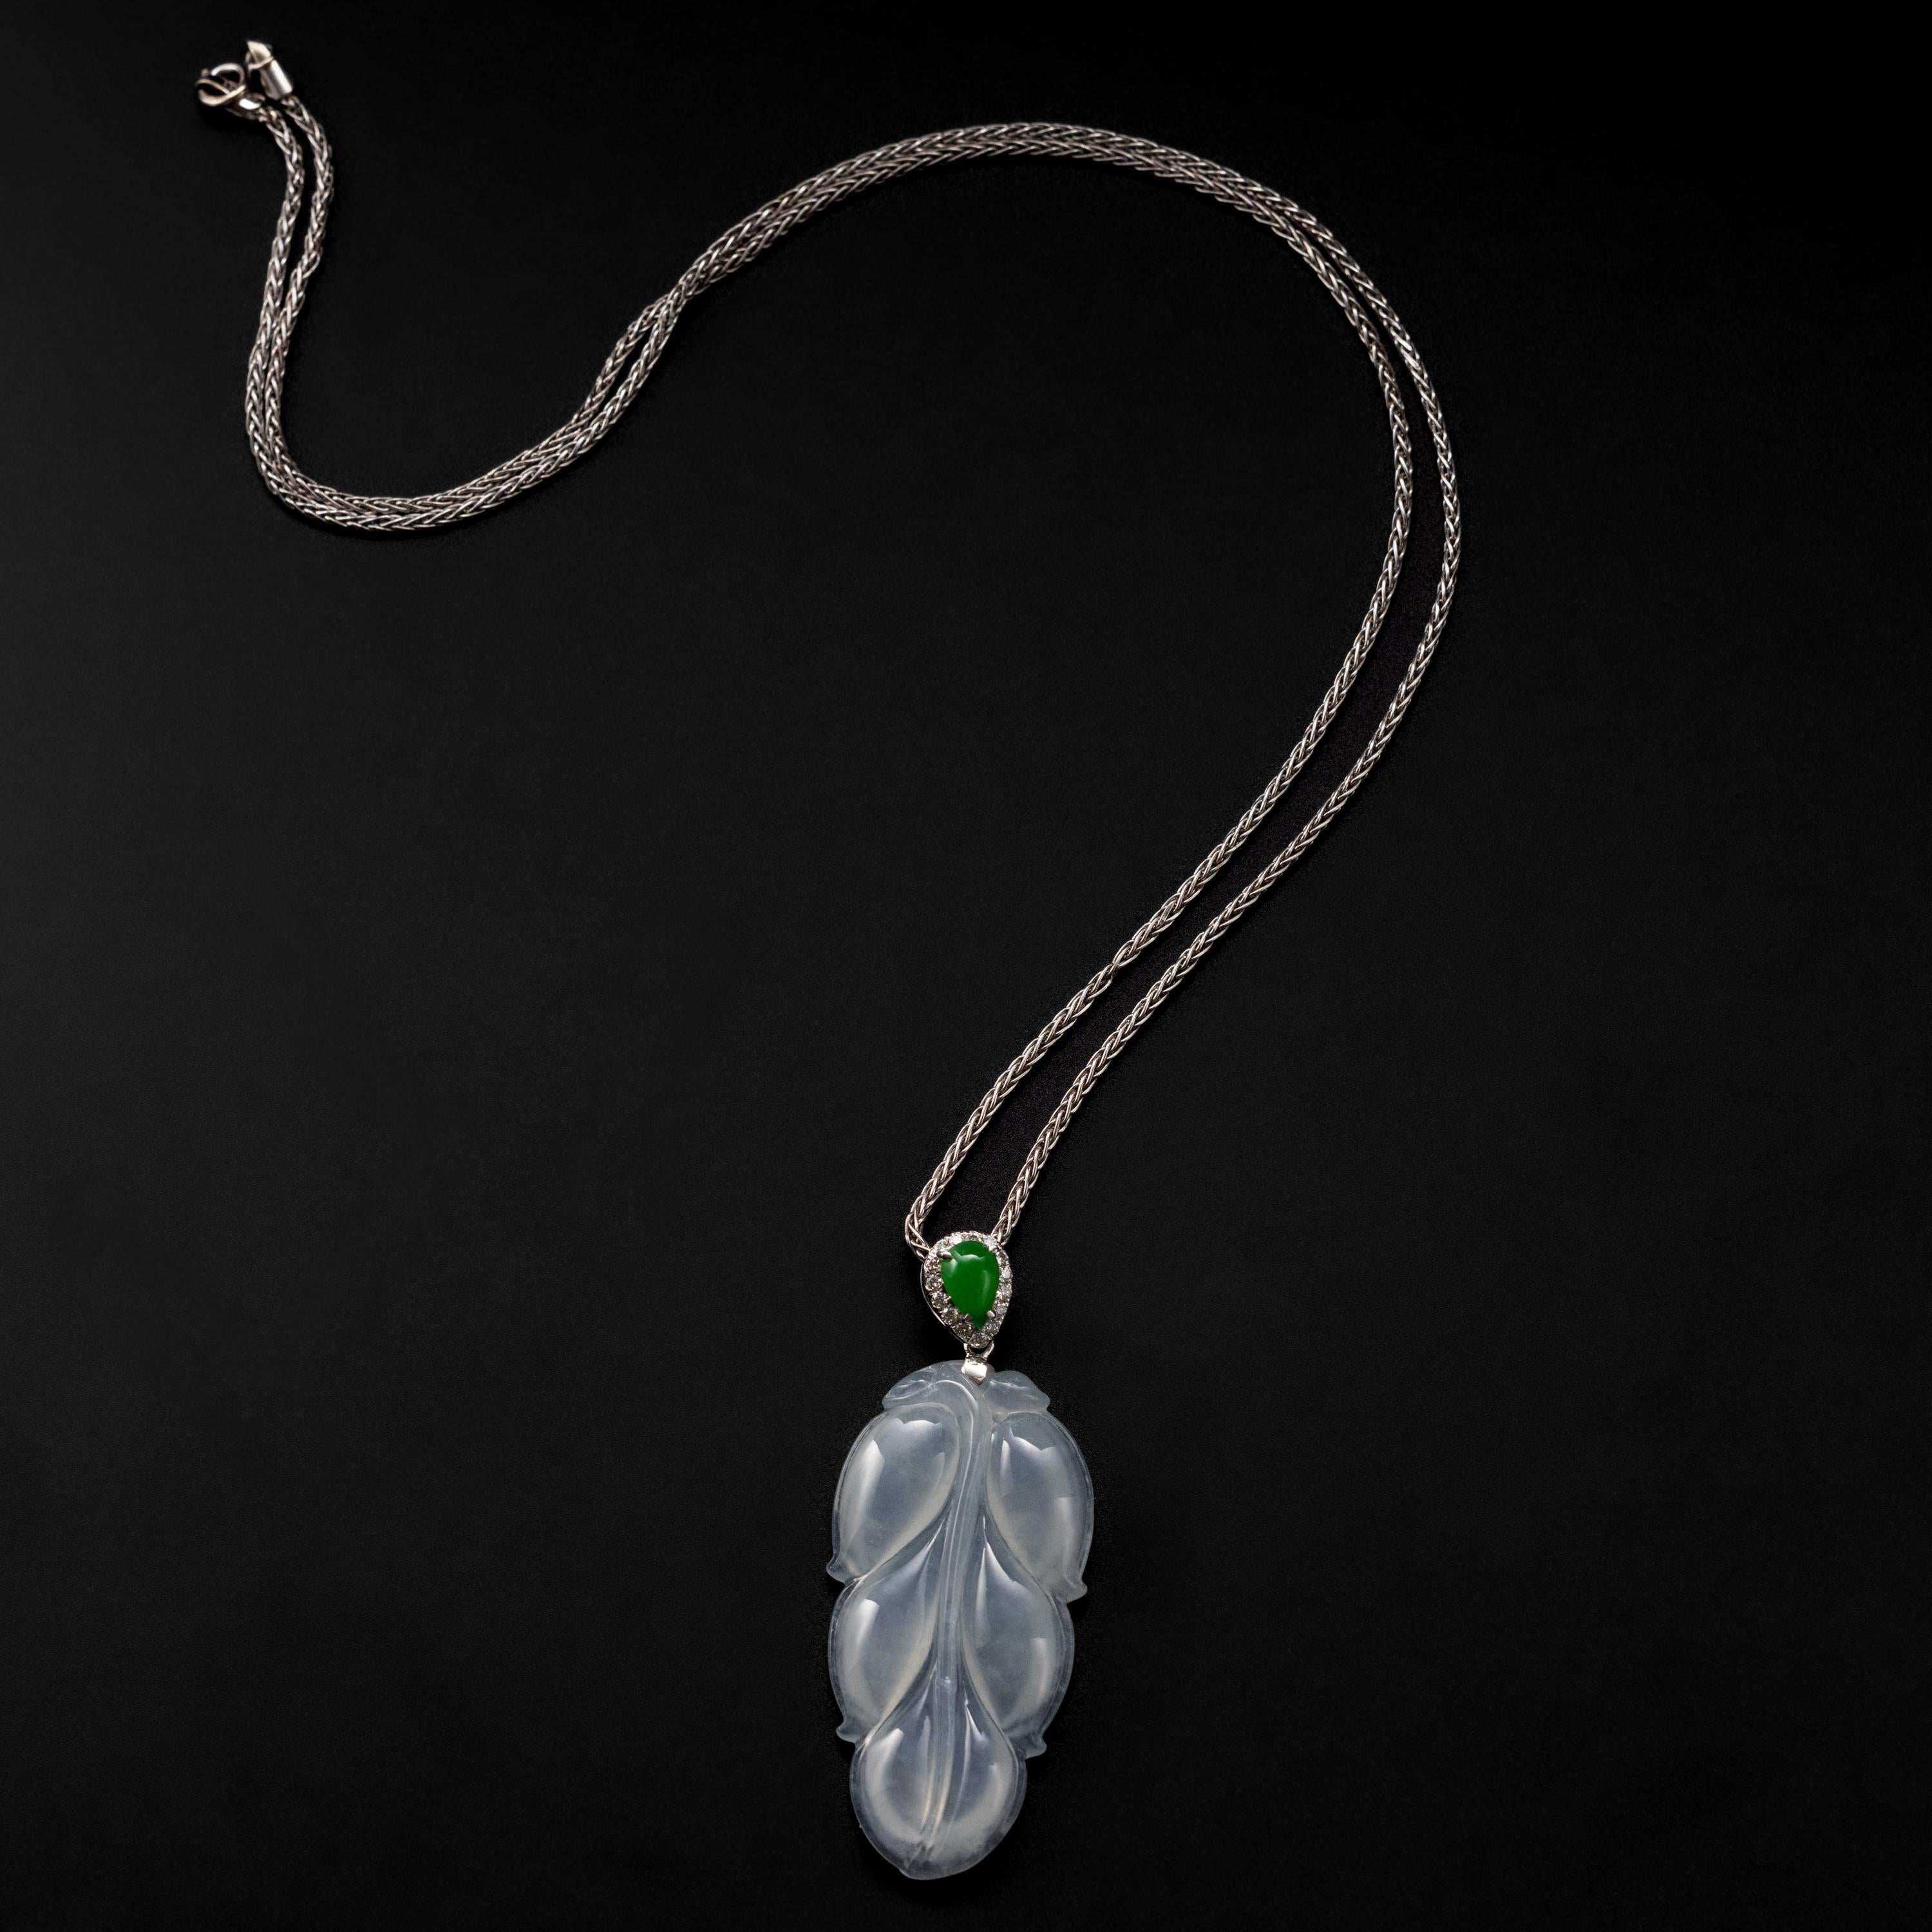 This near-colorless and semi-translucent hand-carved leaf pendant was created in the 1980s from 